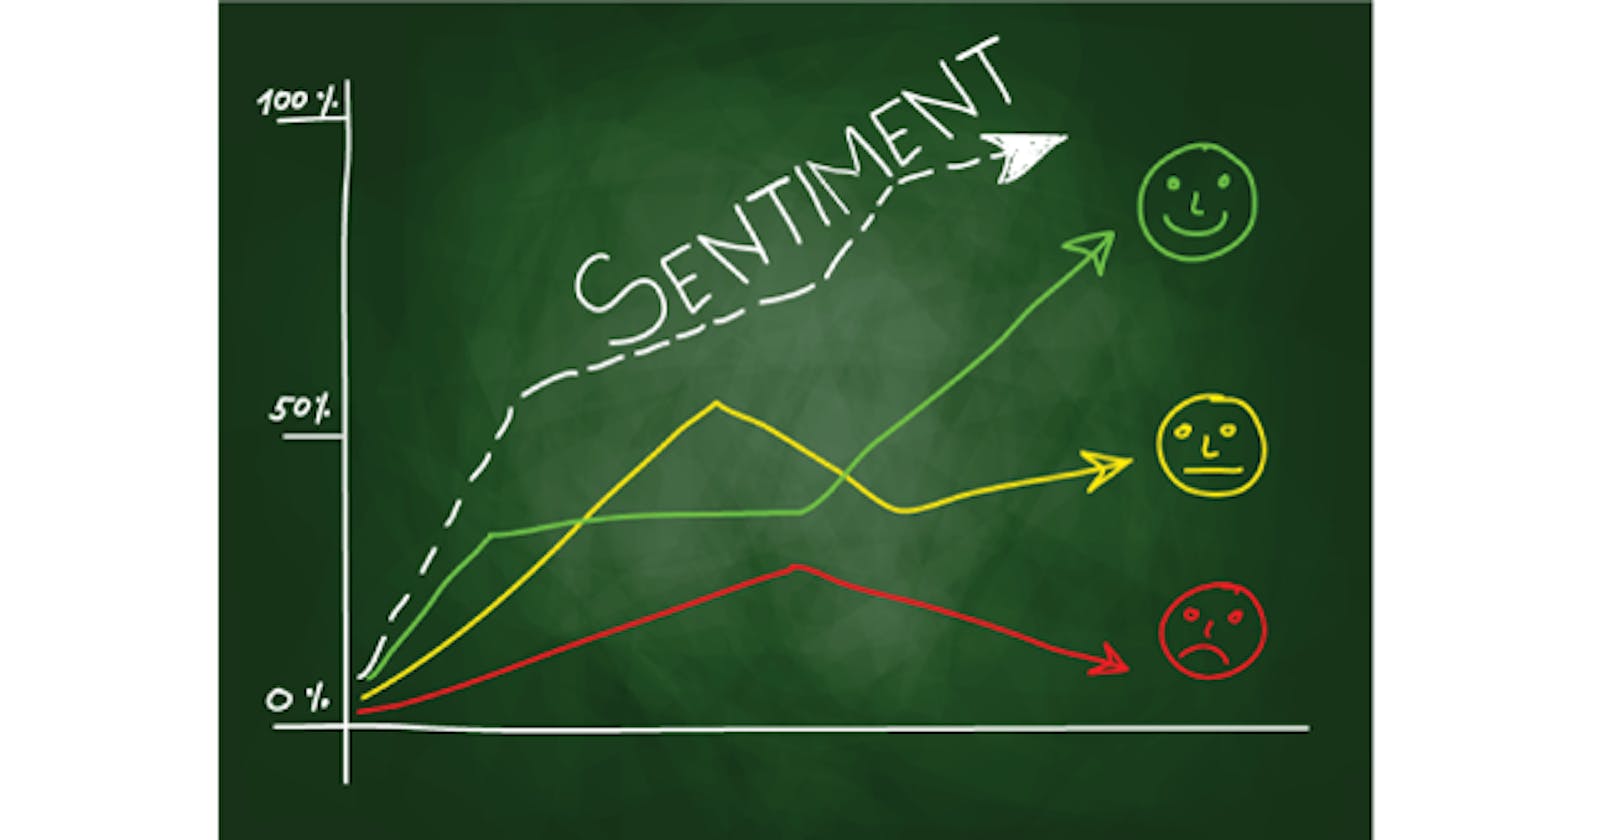 Sentiment analysis Analysis - Naive Bayes Classifier